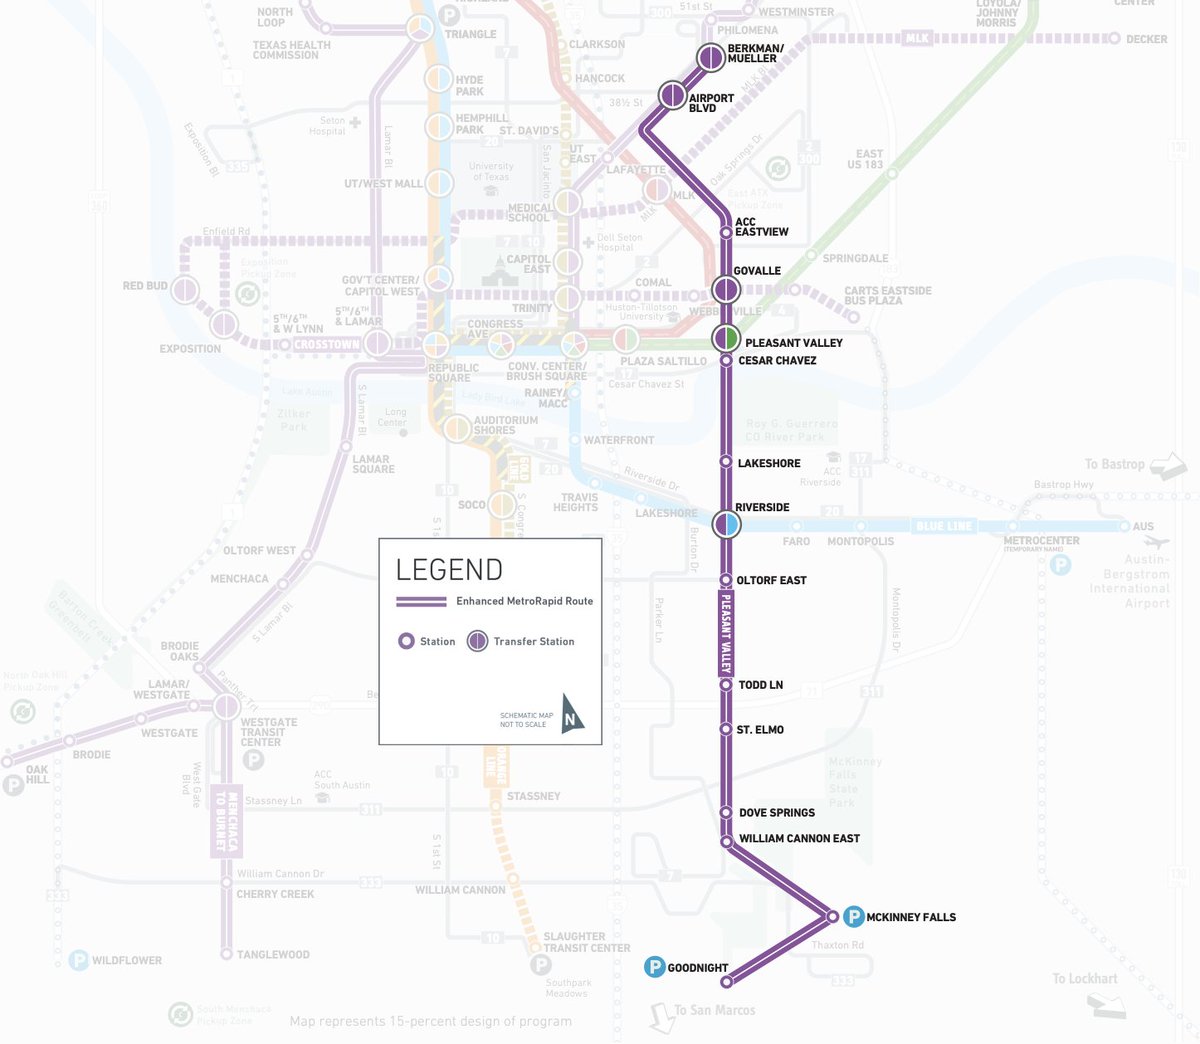 The Pleasant Valley MetroRapid Line, set to launch in 2025, will run from Goodnight Ranch to Berkman/Mueller. This is part of Project Connect. The bus line is supposed to run with battery-powered buses, so chargers will be installed at the Goodnight Ranch Park and Ride.